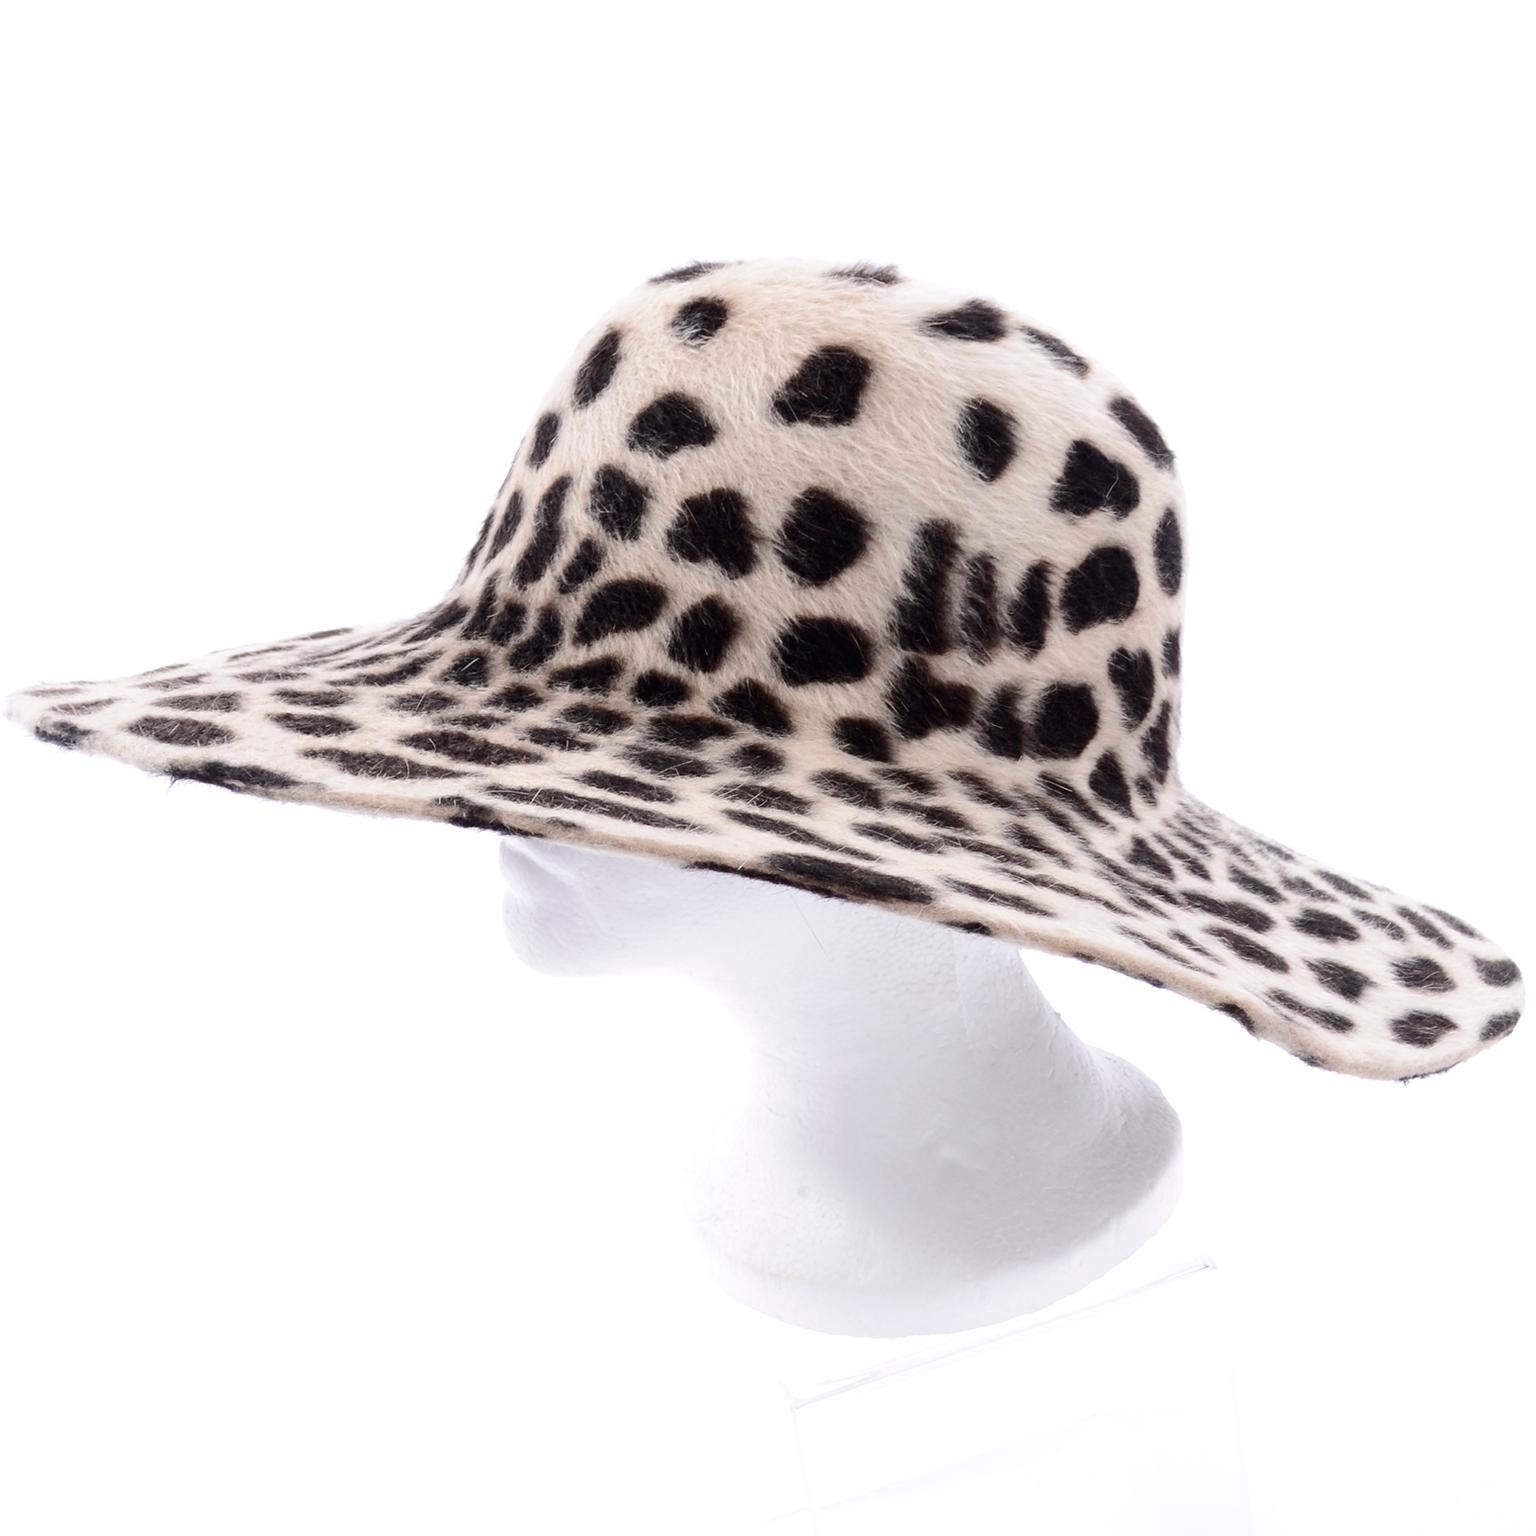 This is a beautiful vintage hat that was purchased at Nordstrom in the late 1980's or early 1990's.  The hat is made of rabbit fur in a cheetah print and was made in Italy.  We love hats and this one would be a great one to add to your